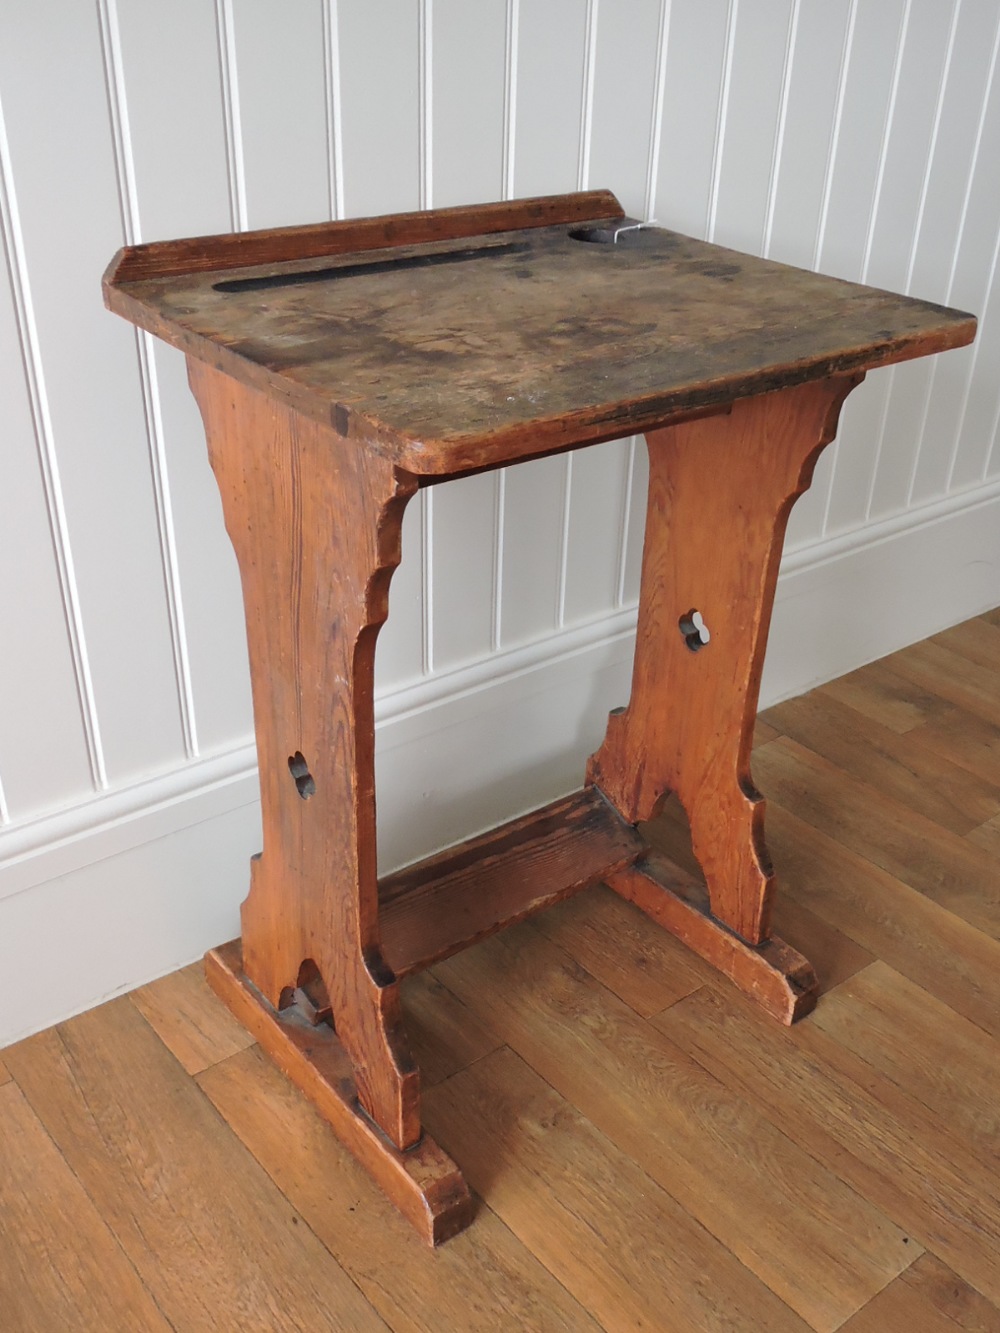 An Arts and Crafts pitch pine school desk rectangular writing surface with ink well and pen tray